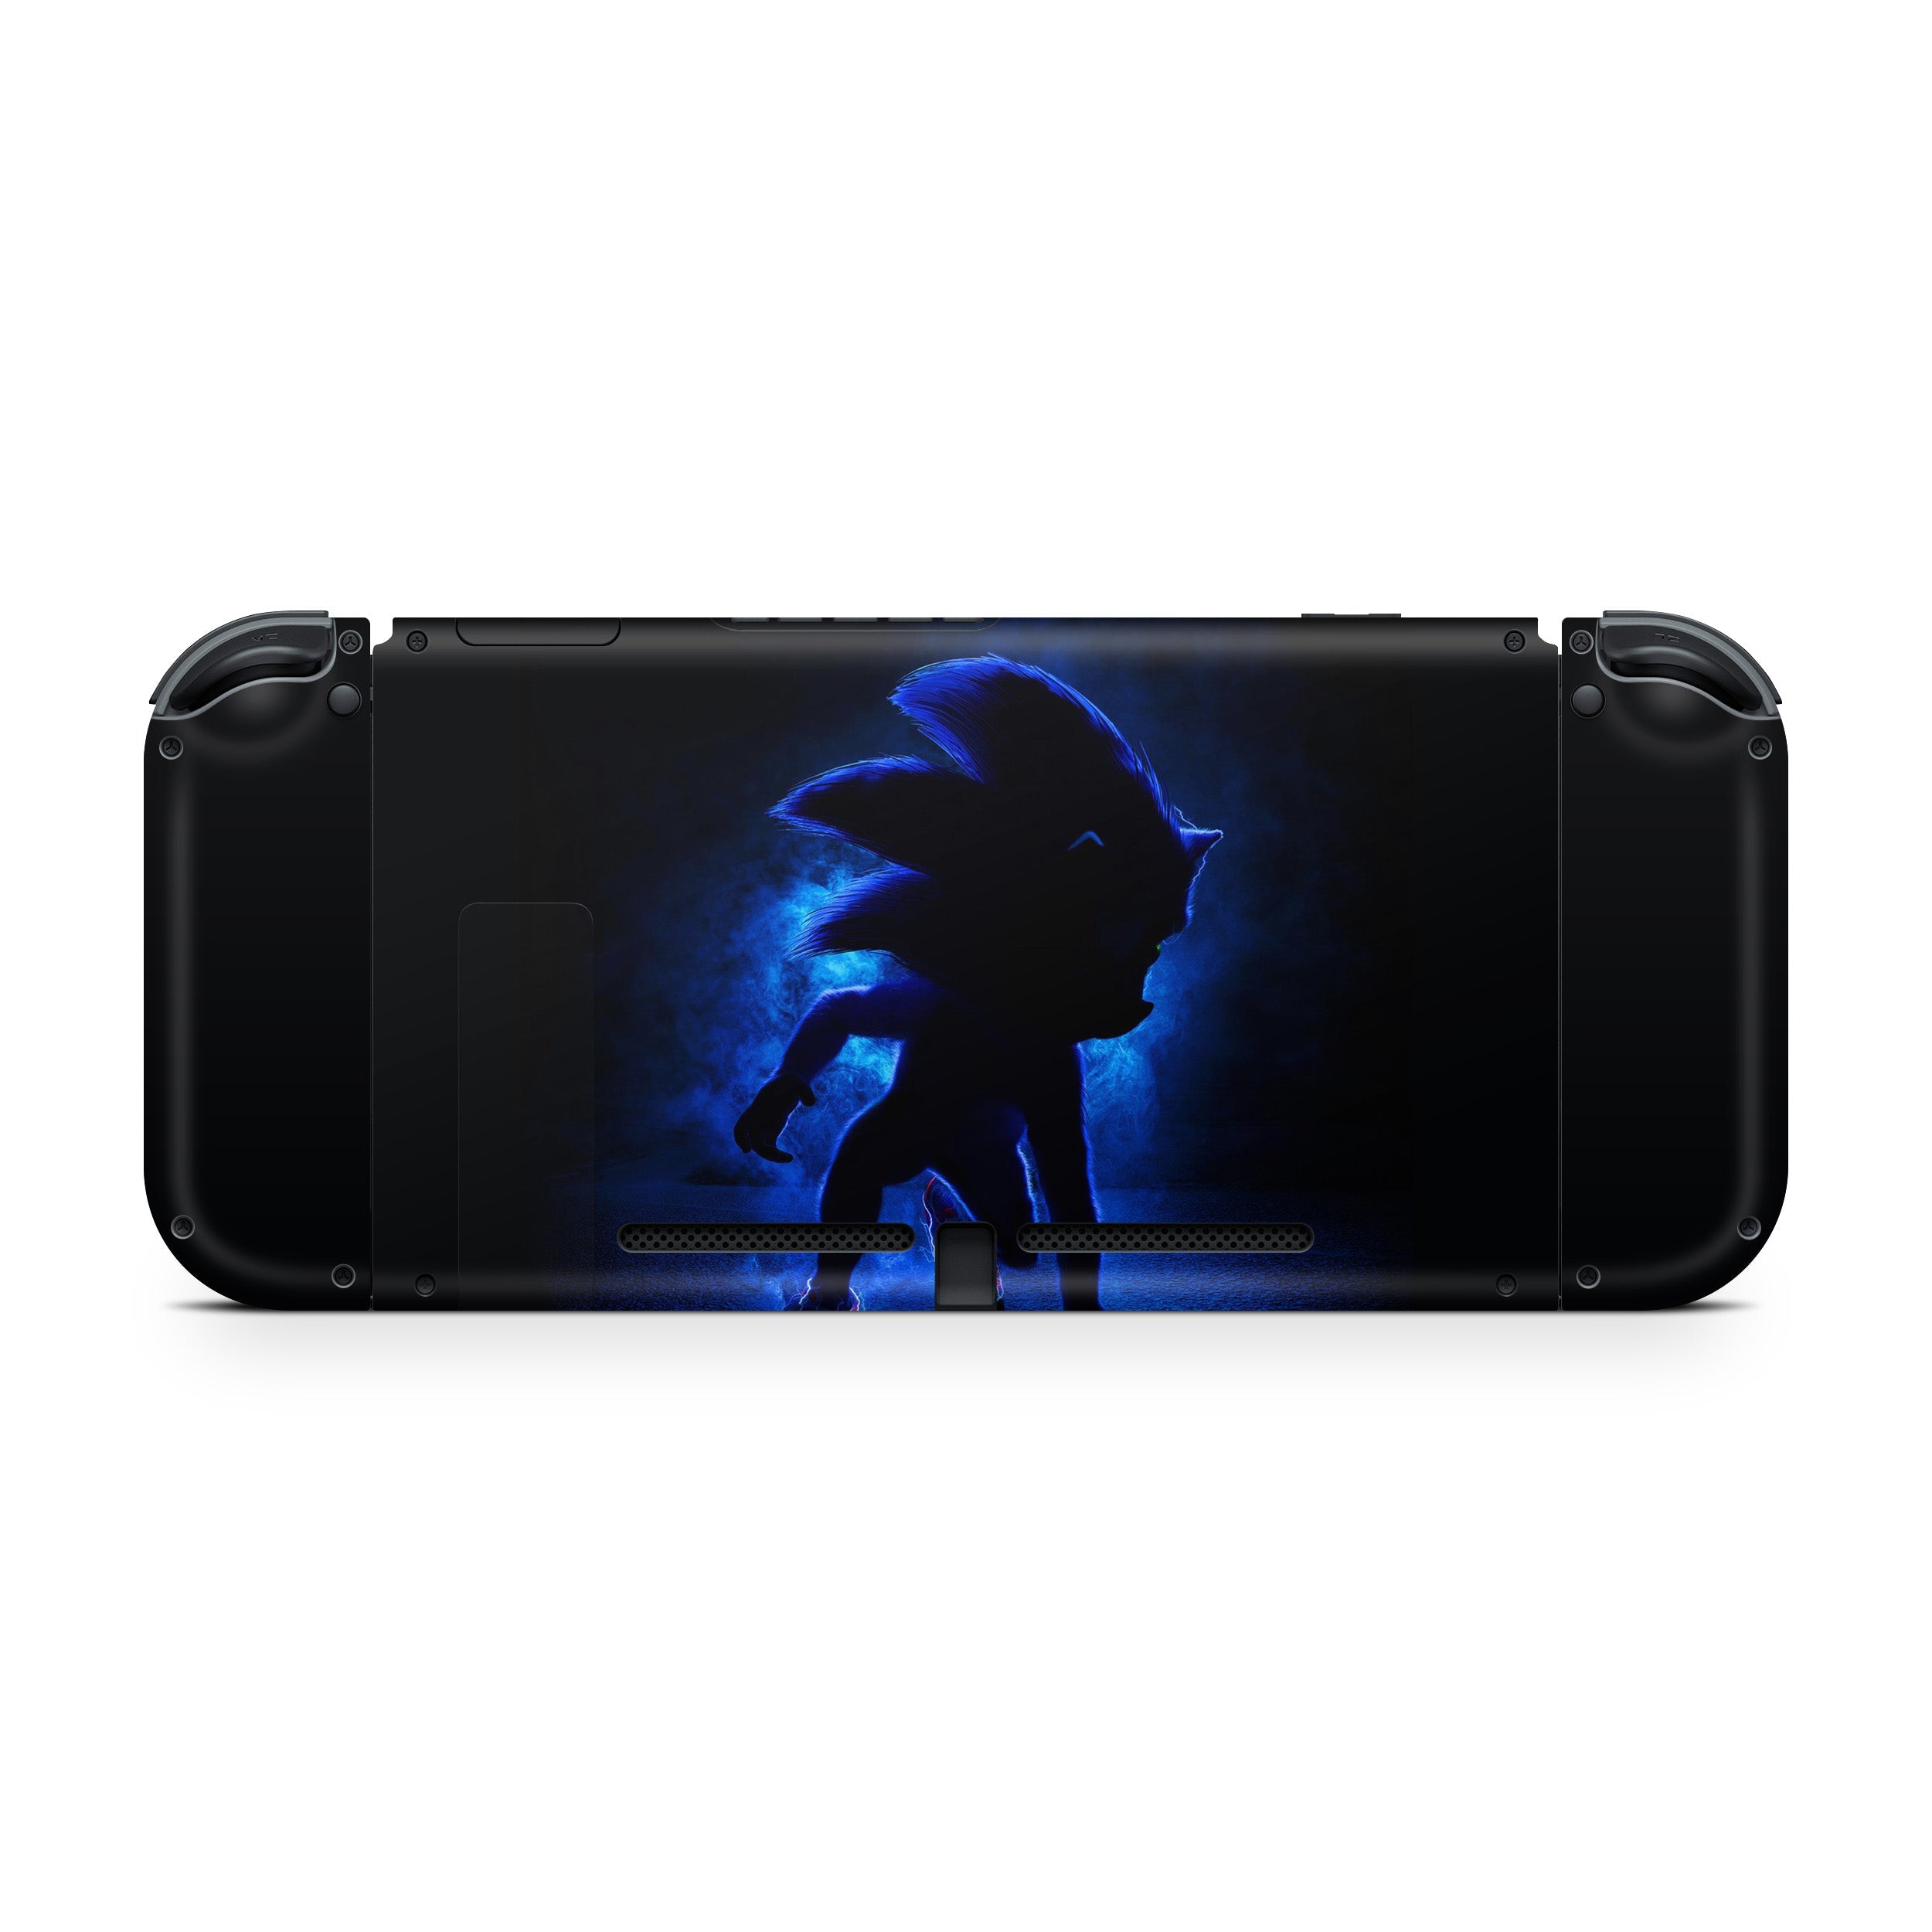 A video game skin featuring a Sonic The Hedgehog design for the Nintendo Switch.